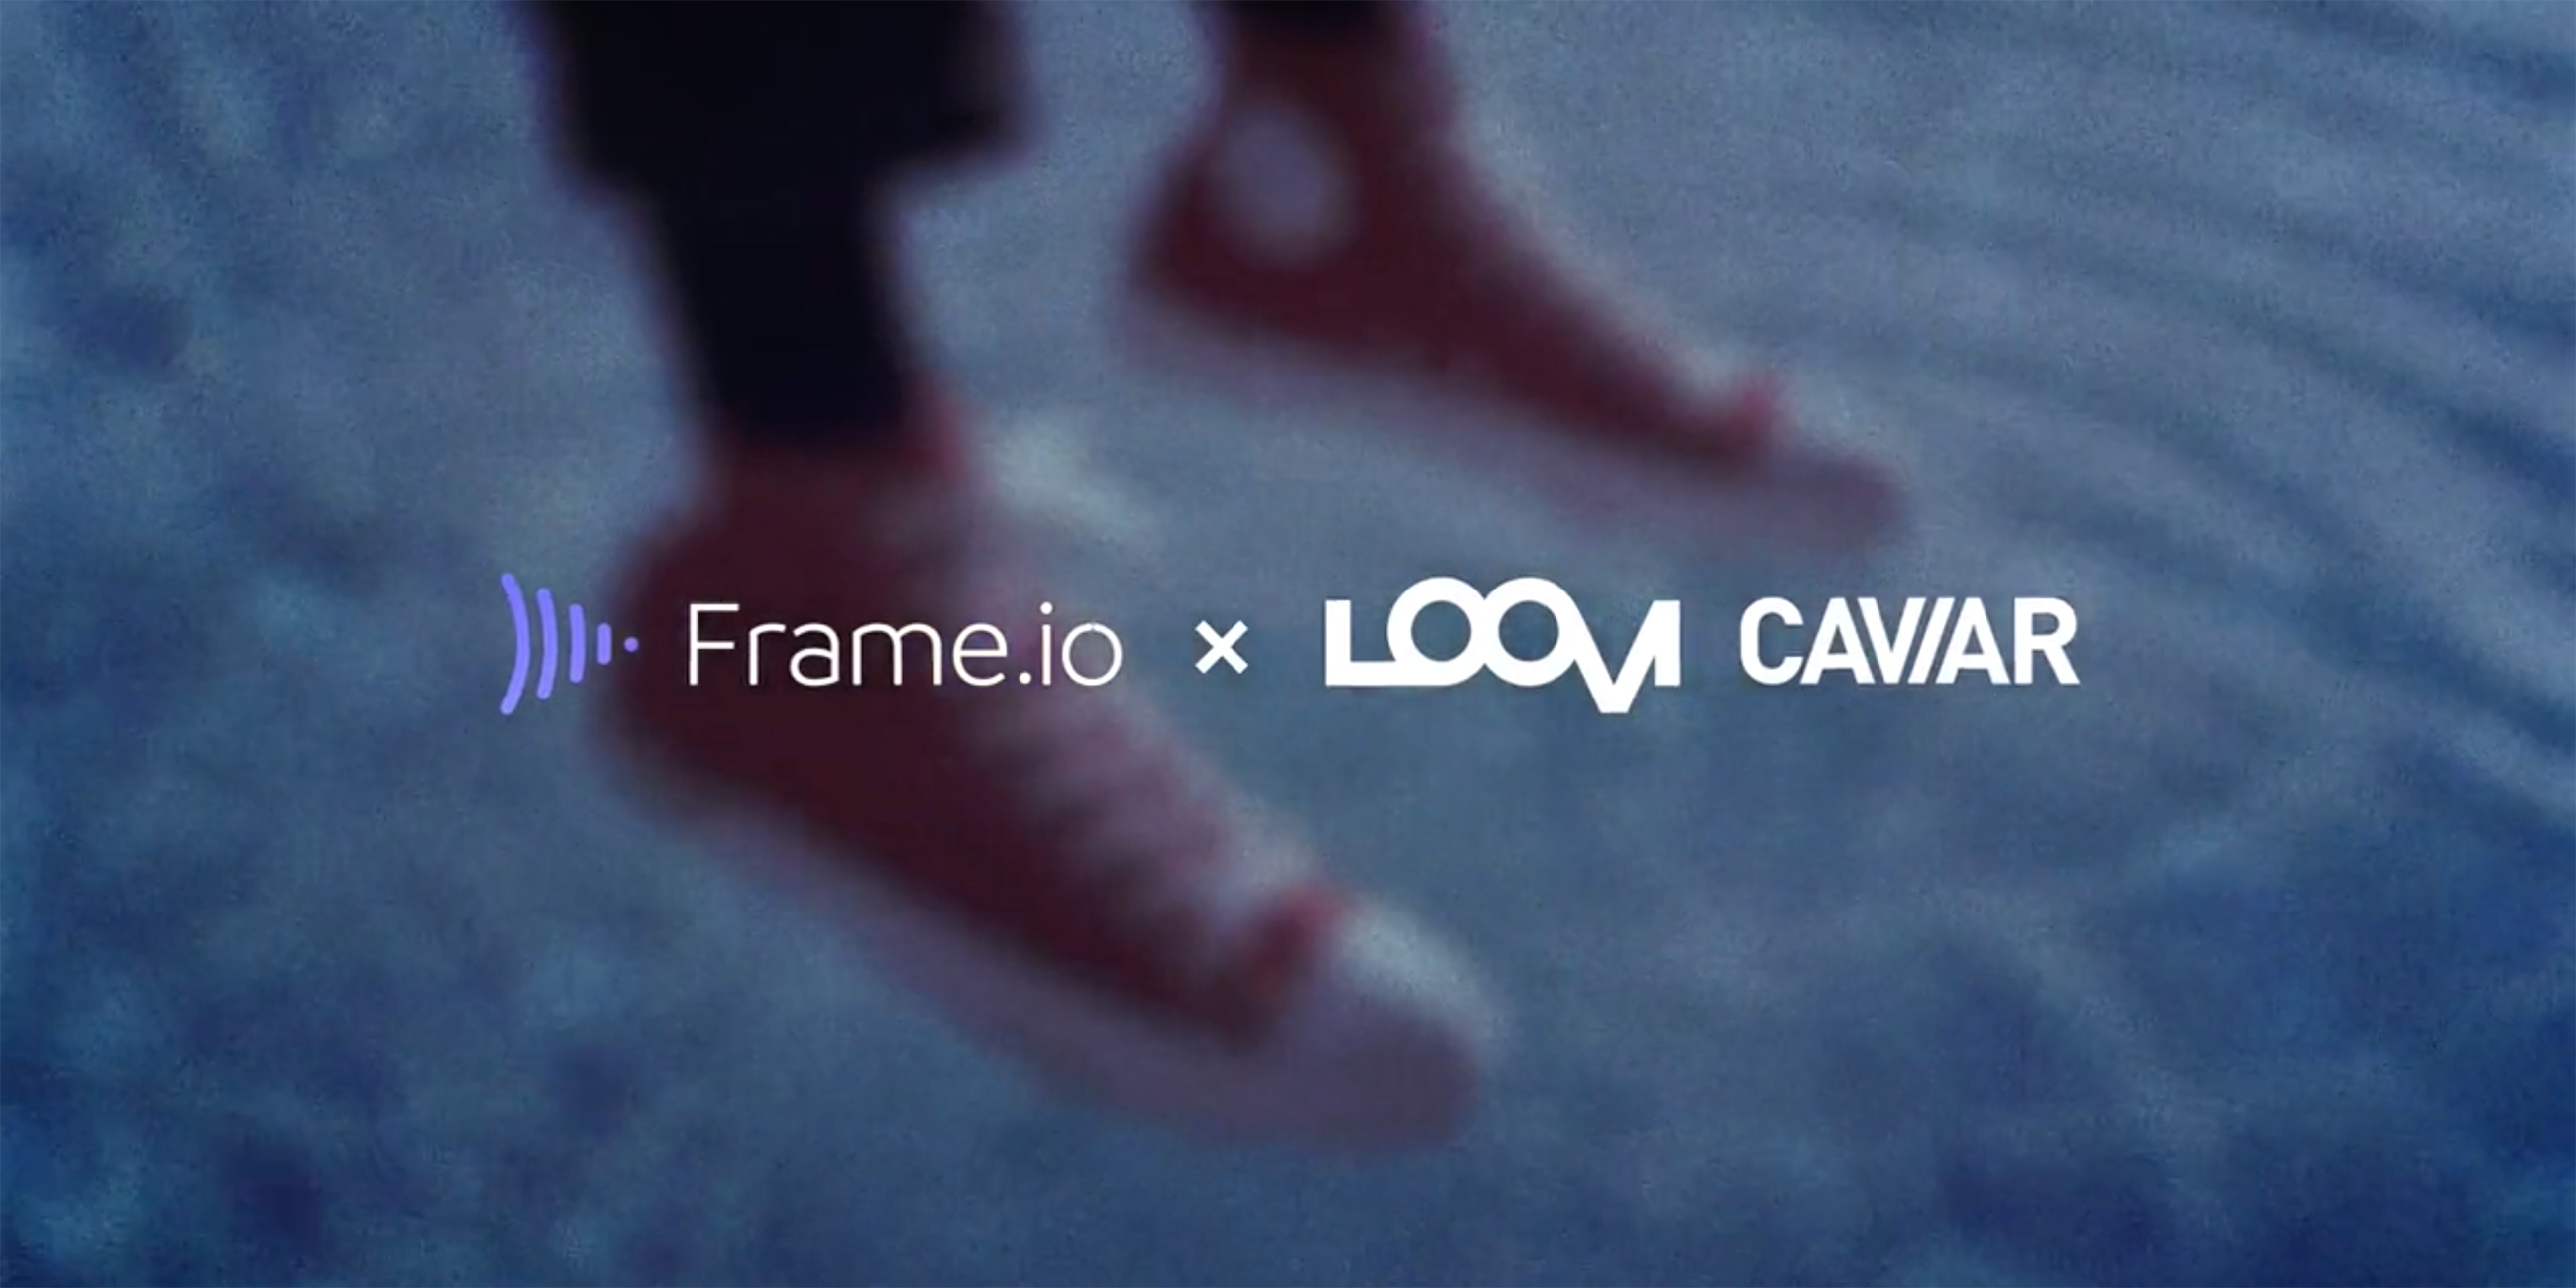 Caviar + Loom + Frame.io = A Winning Formula for Large-scale Commercial Creation